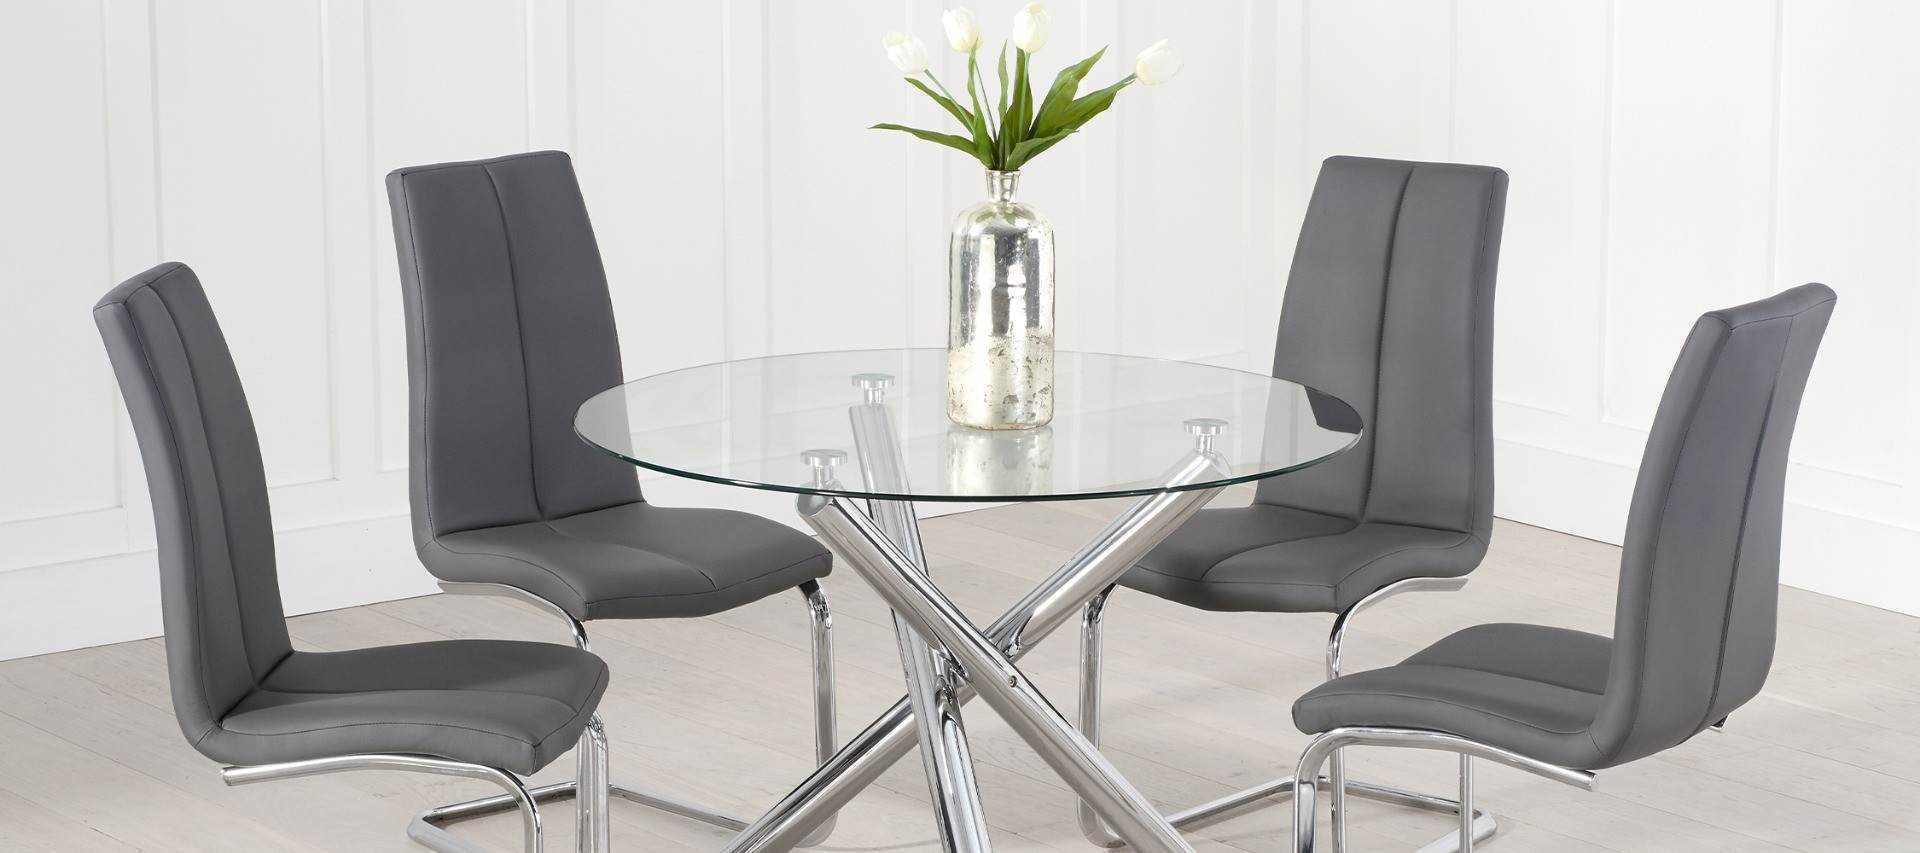 Photo 5 of Denver 110cm glass dining table with 4 grey gianni chairs